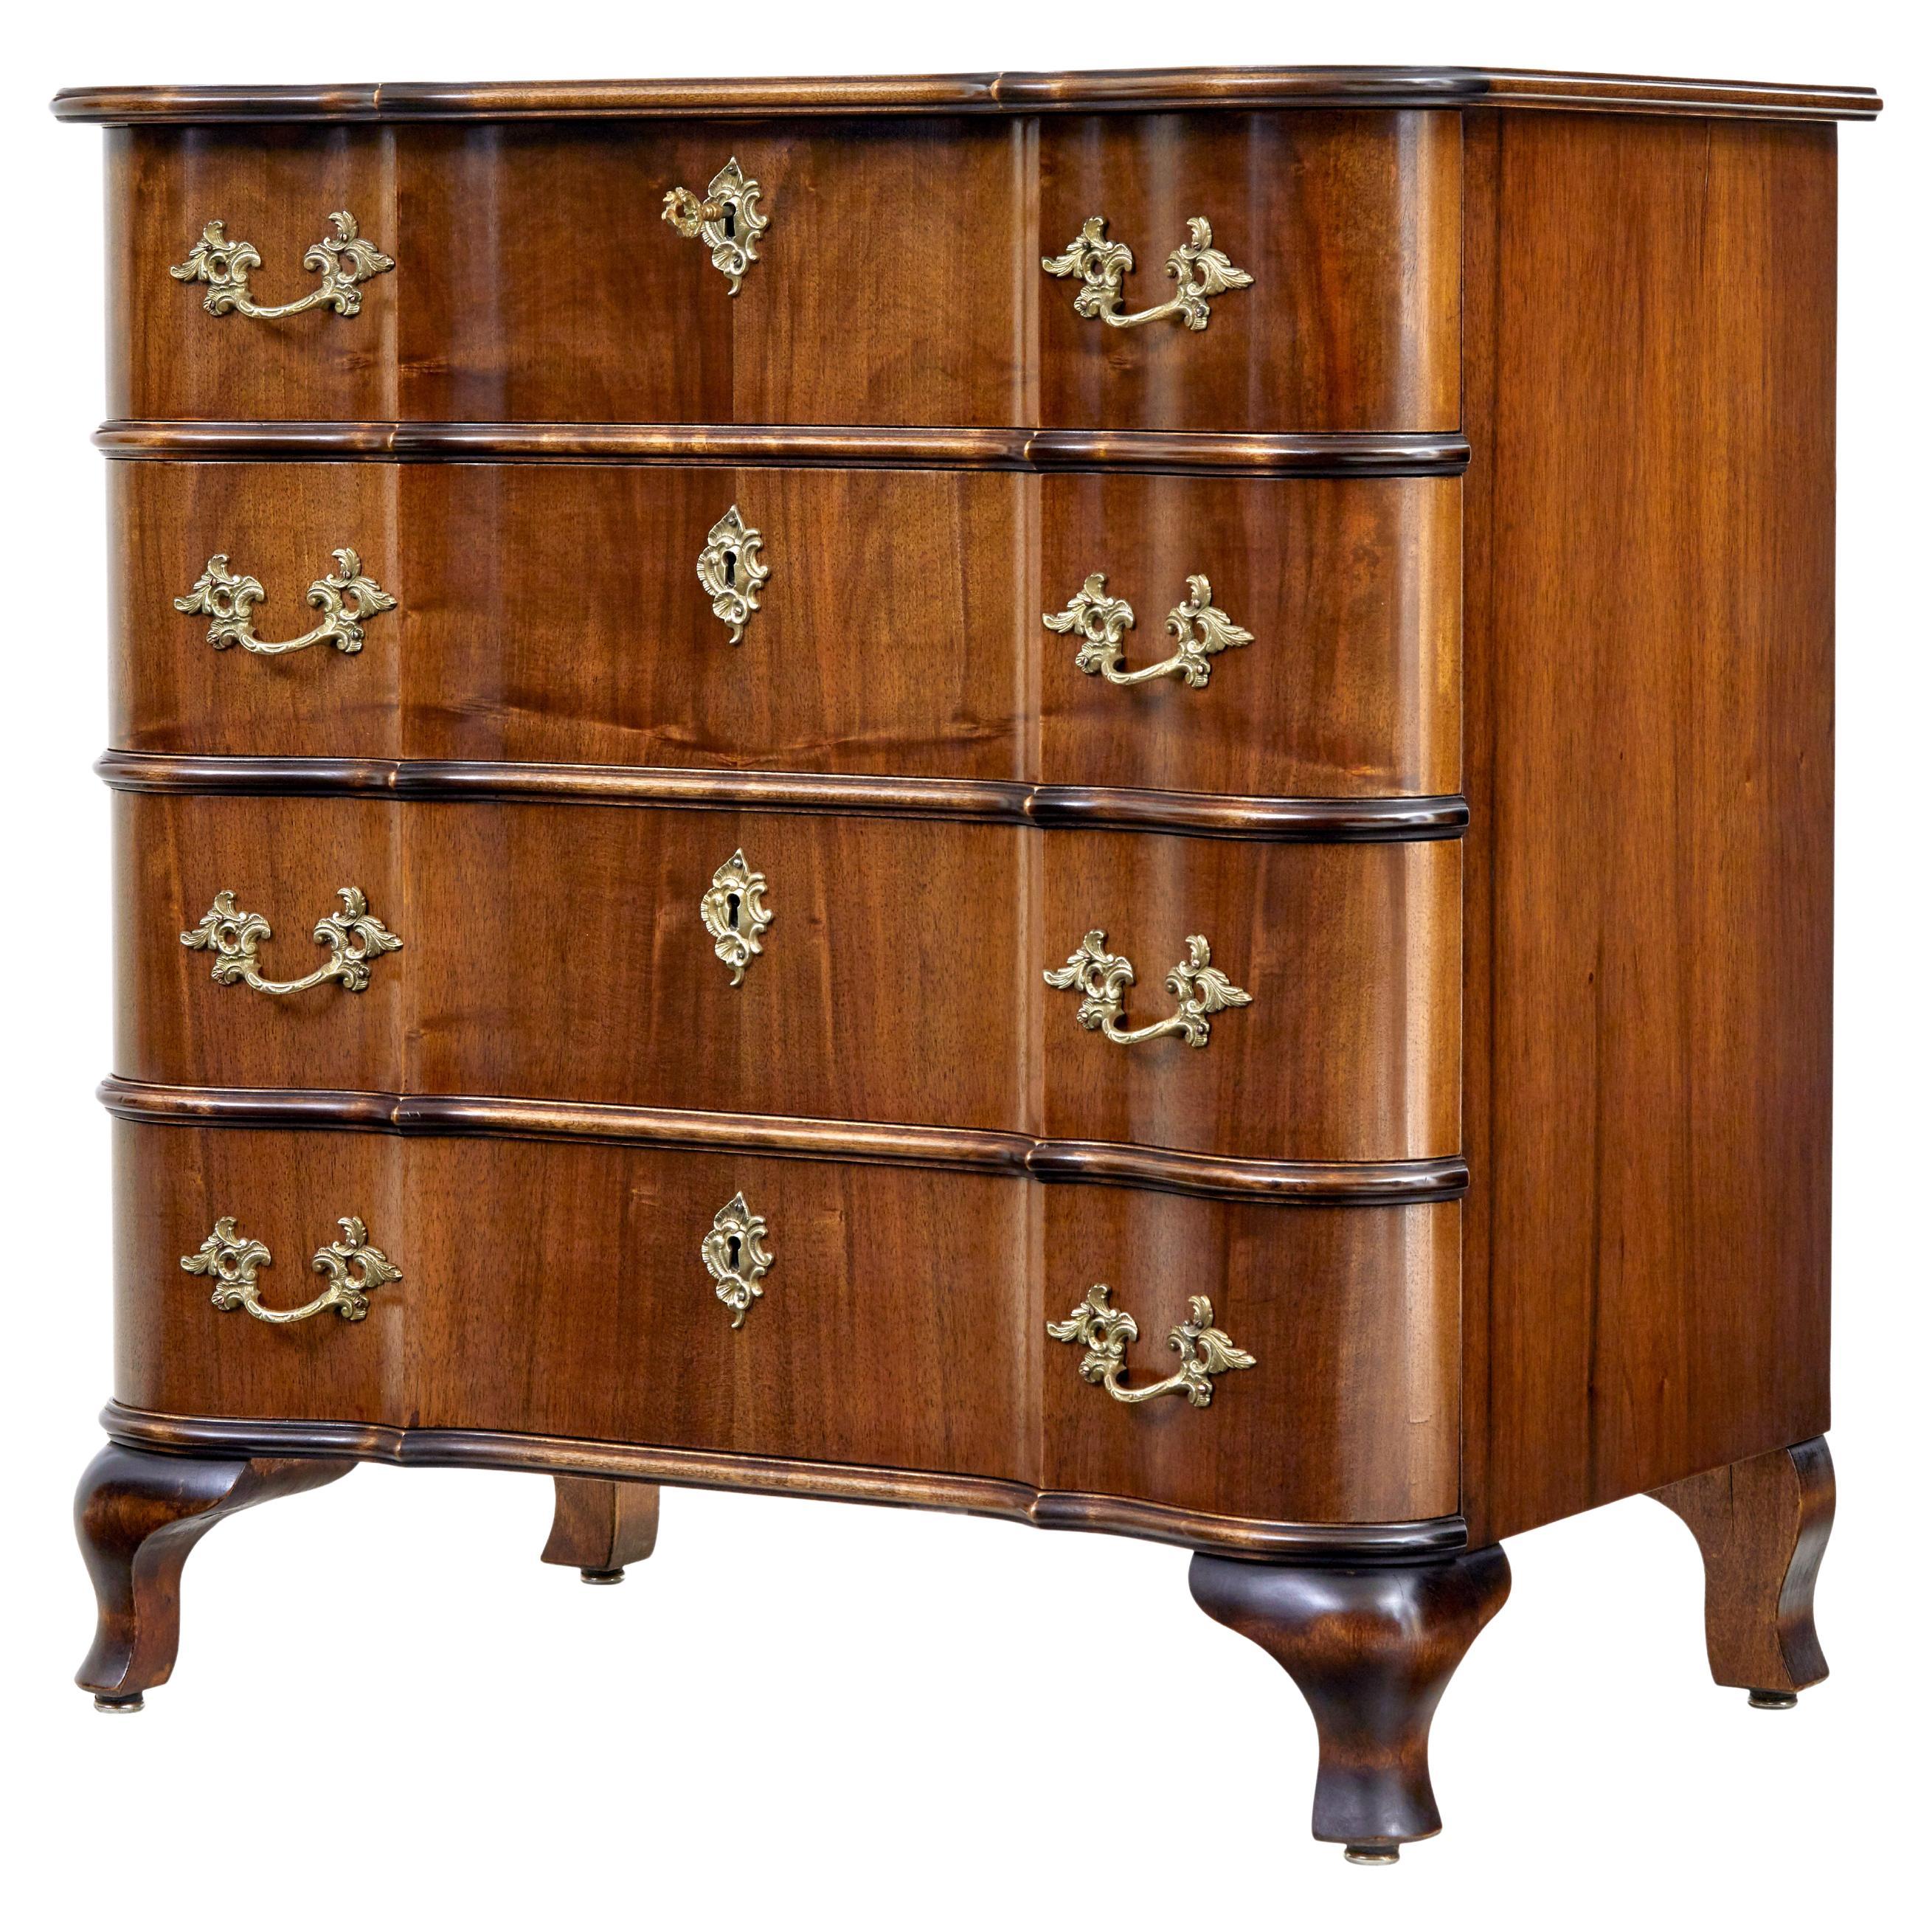 Mid 20th century baroque revival walnut chest of drawers